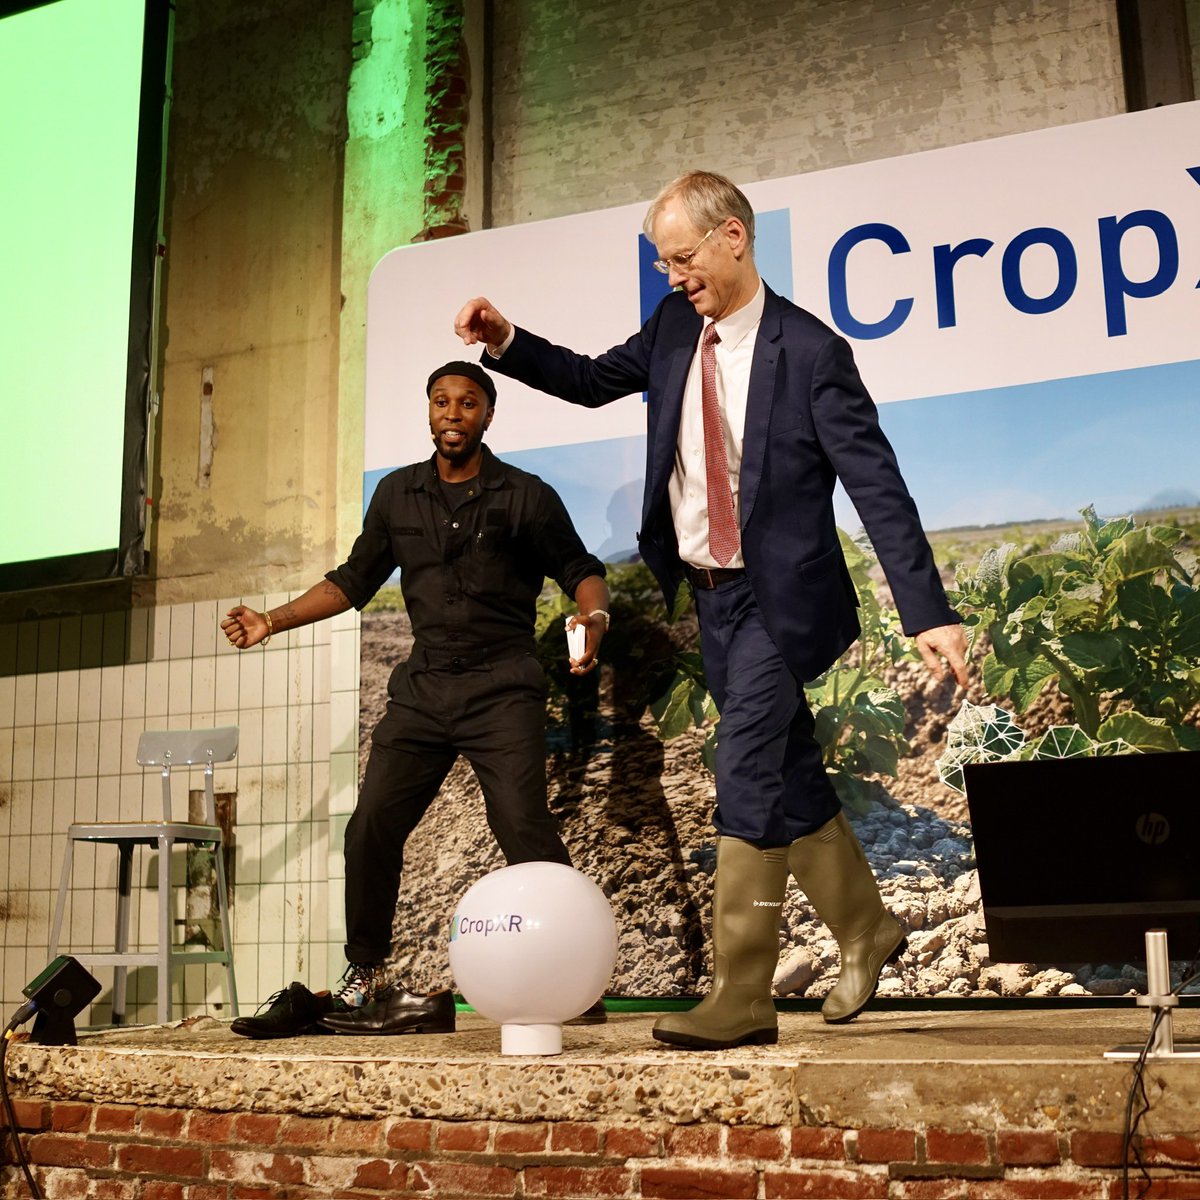 CropXR quite literally kicked off today! The ceremonial kick off was made by Marten van den Berg, director general Agro of the Dutch Ministry of Agriculture, Nature and Food Quality. Check out his rain boots! Good luck @cropxr!